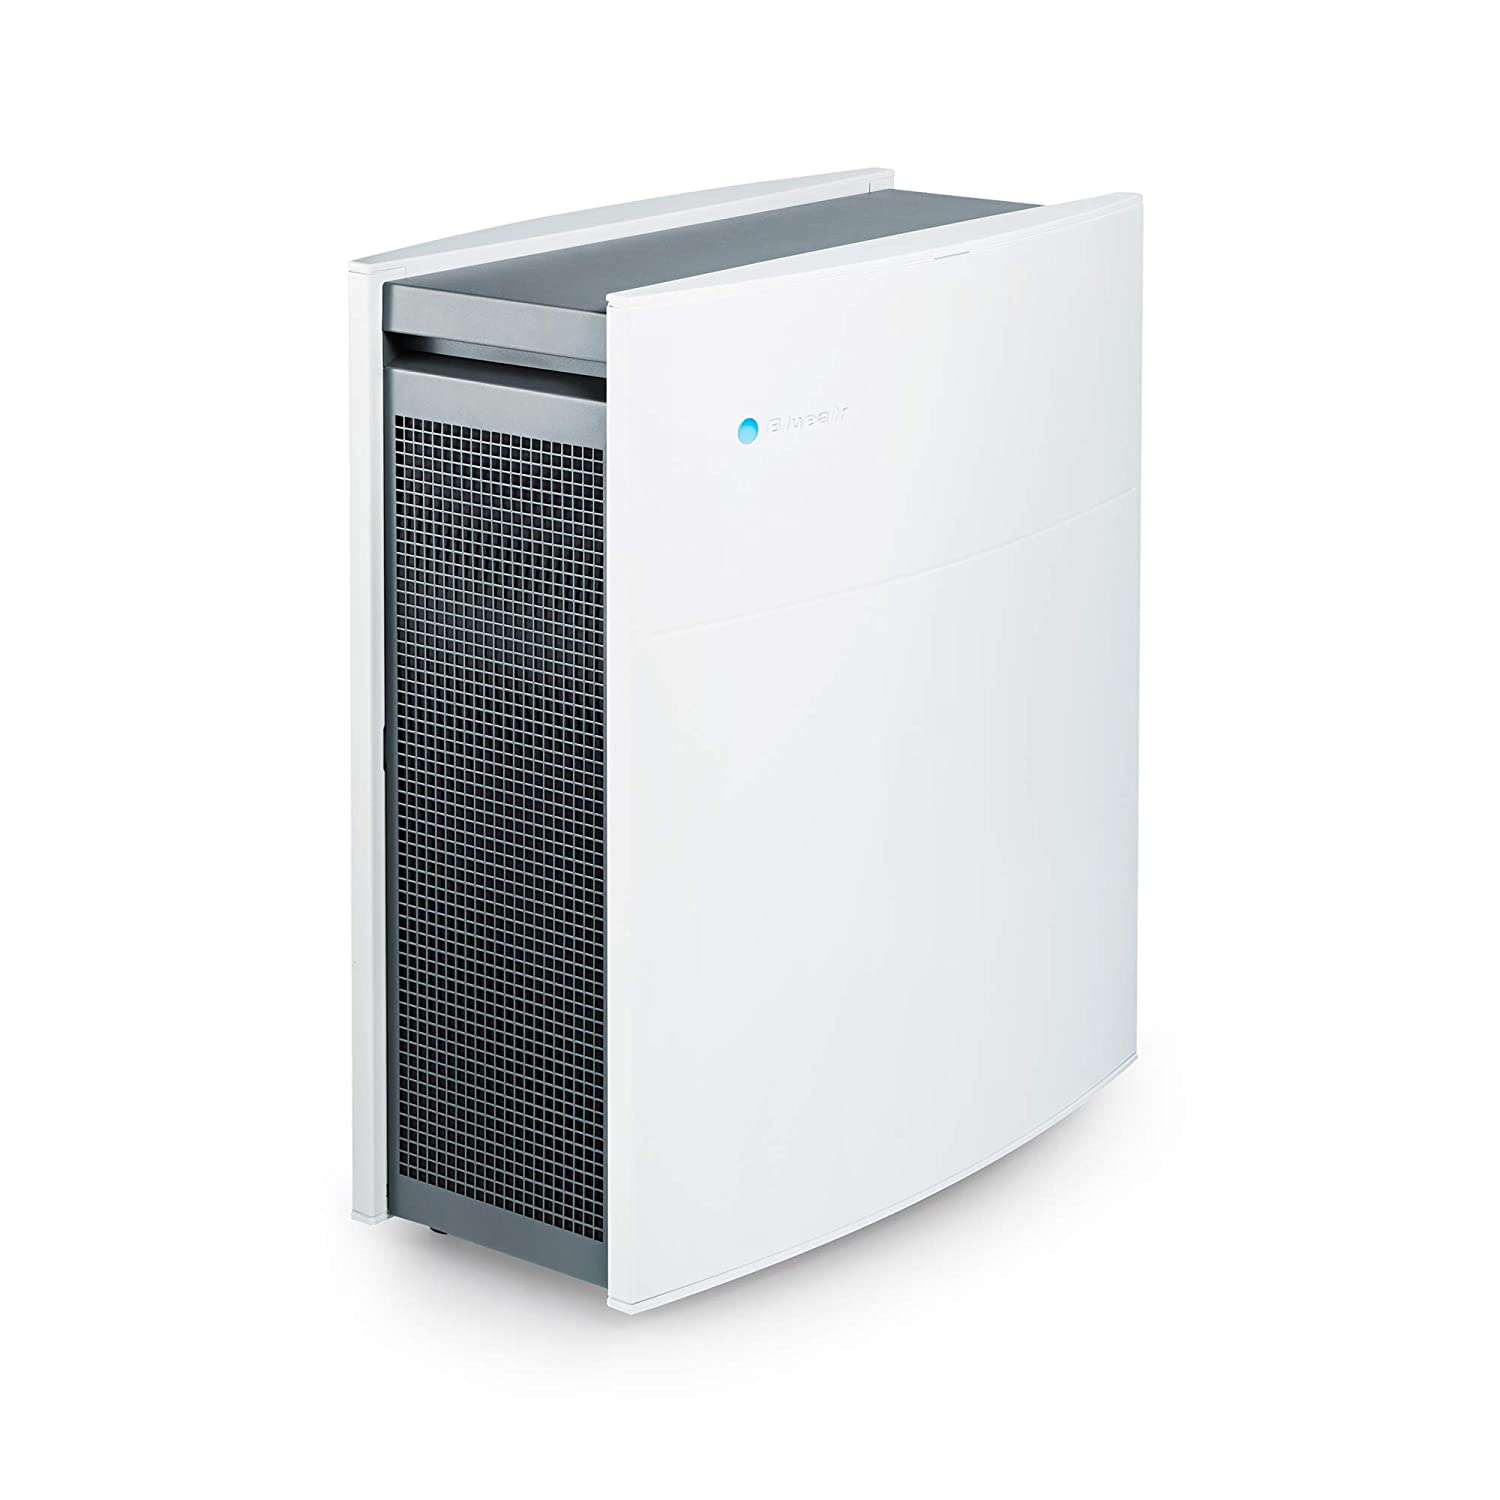 Blueair Classic 480i Air Purifier with HEPASilent Technology and DualProtection Filters